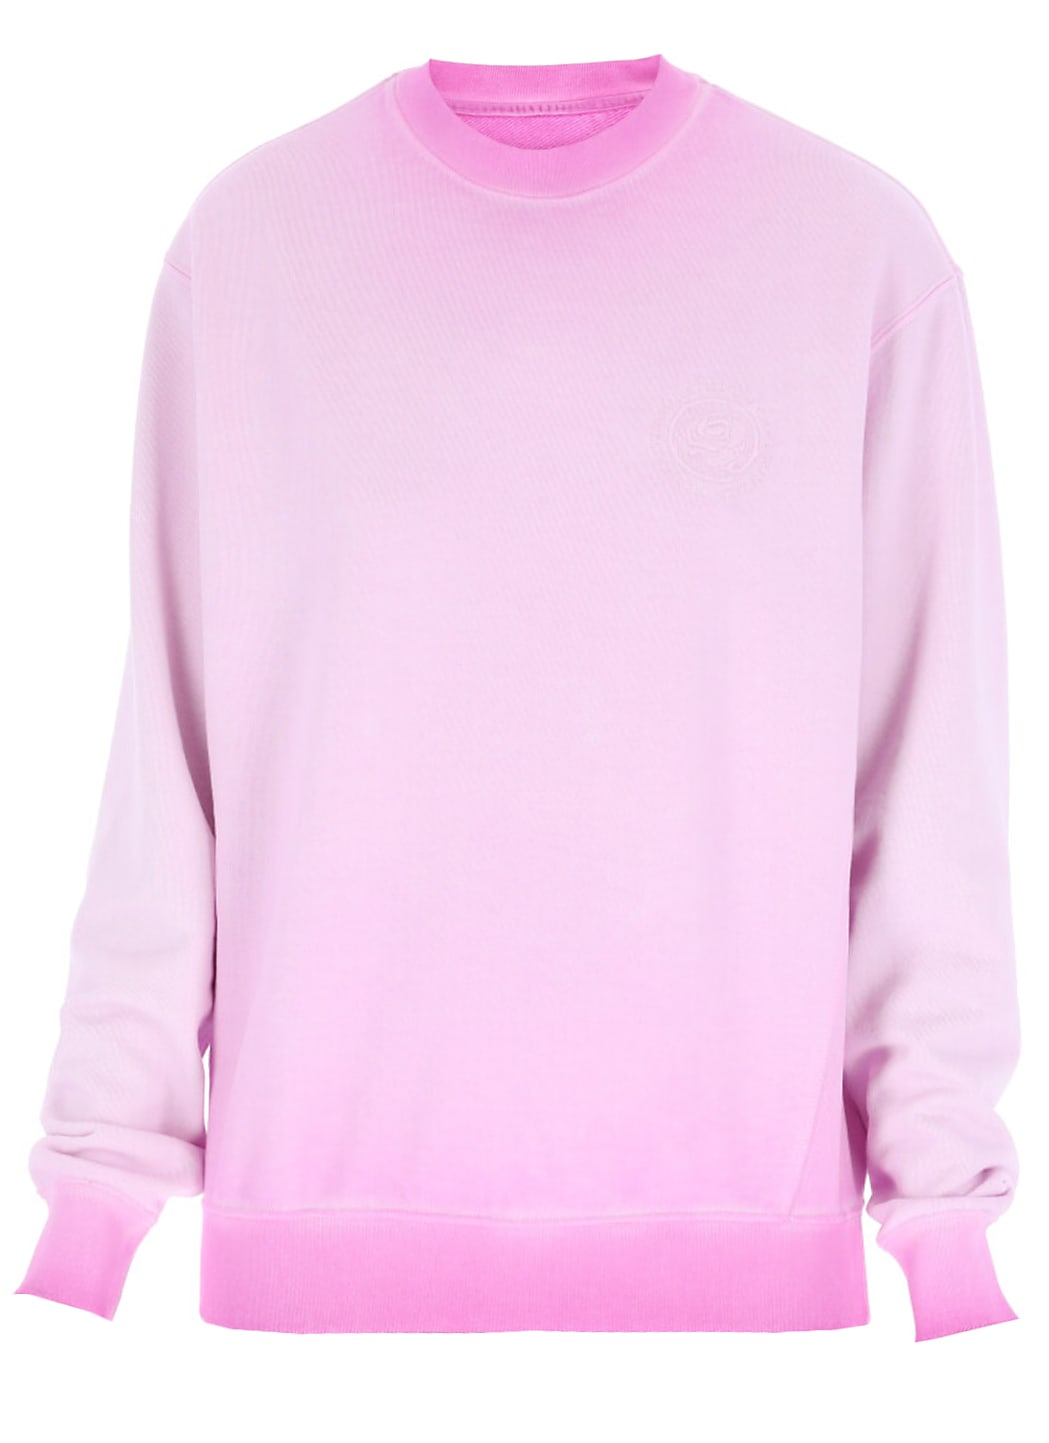 Opening Ceremony Sweatshirt With Embroidered Rose